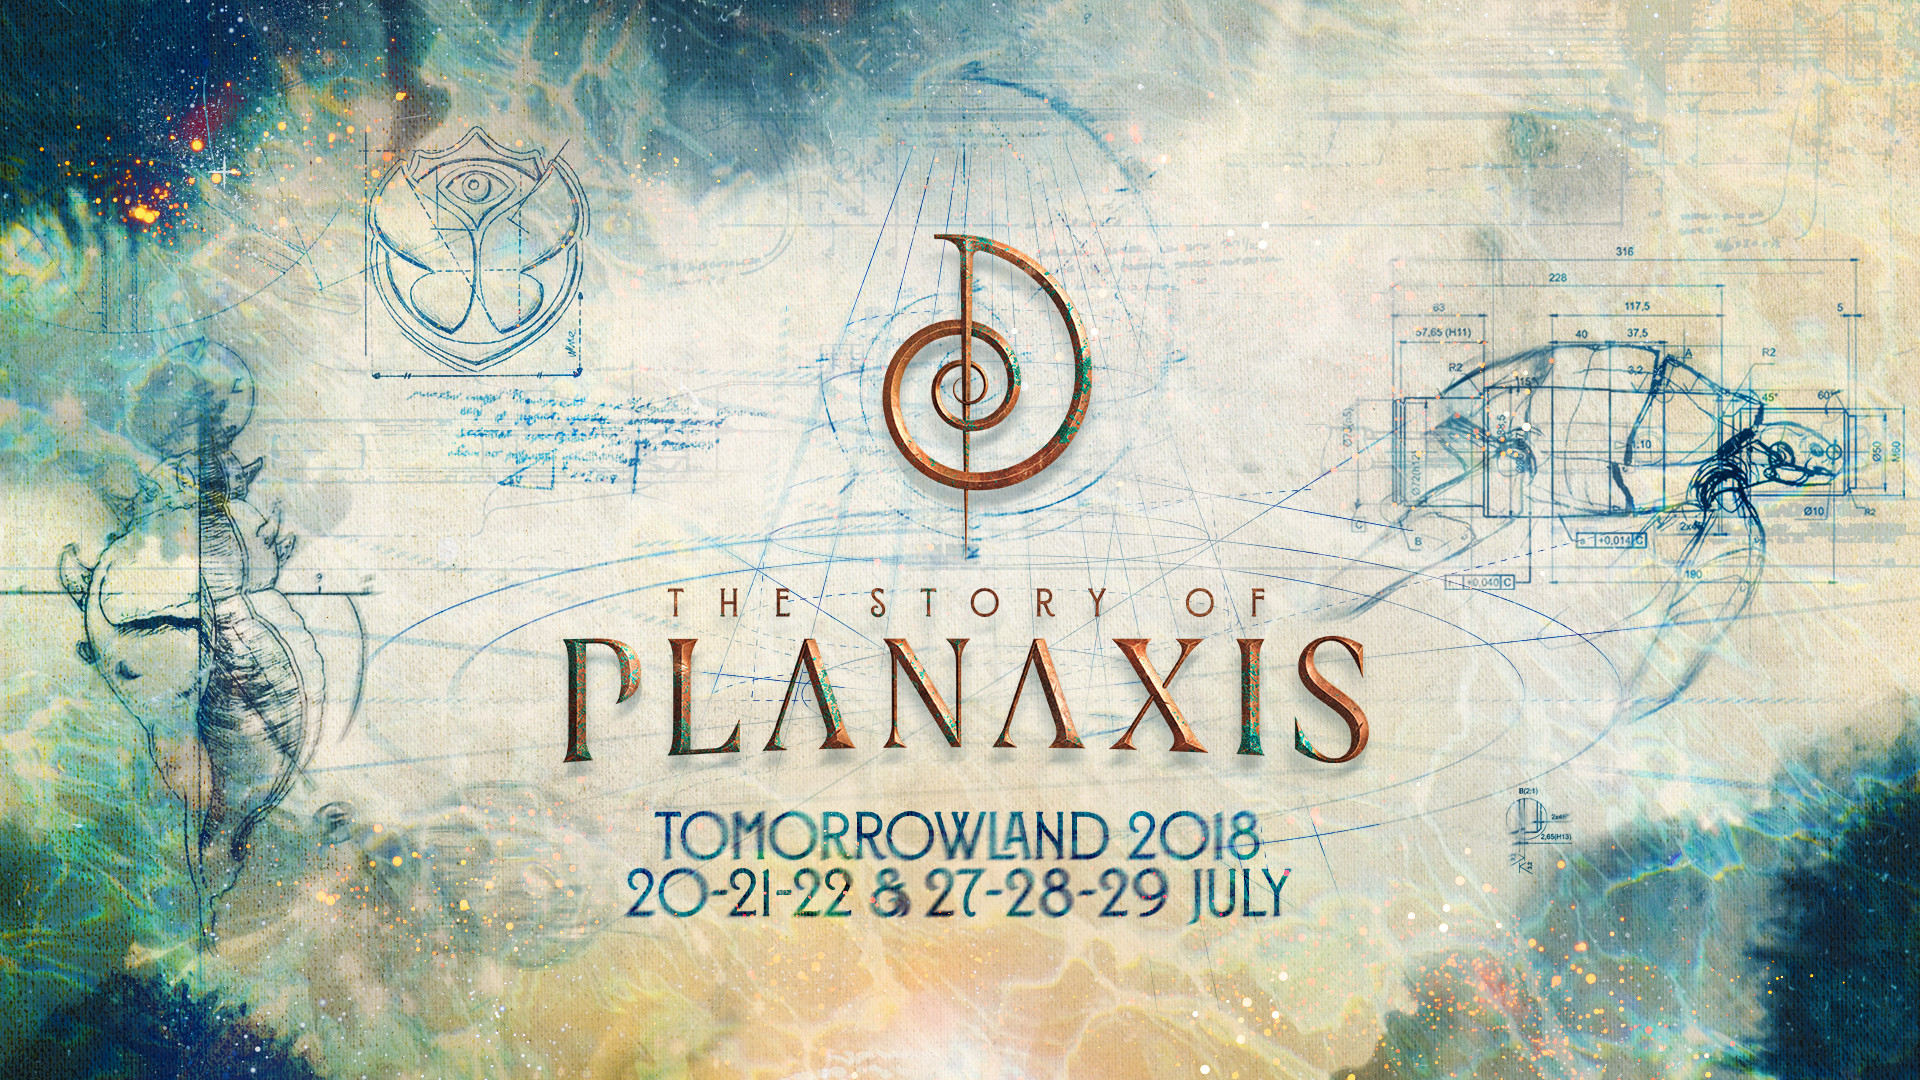 1920x1080 The Story of PLANAXIS – Tomorrowland 2018